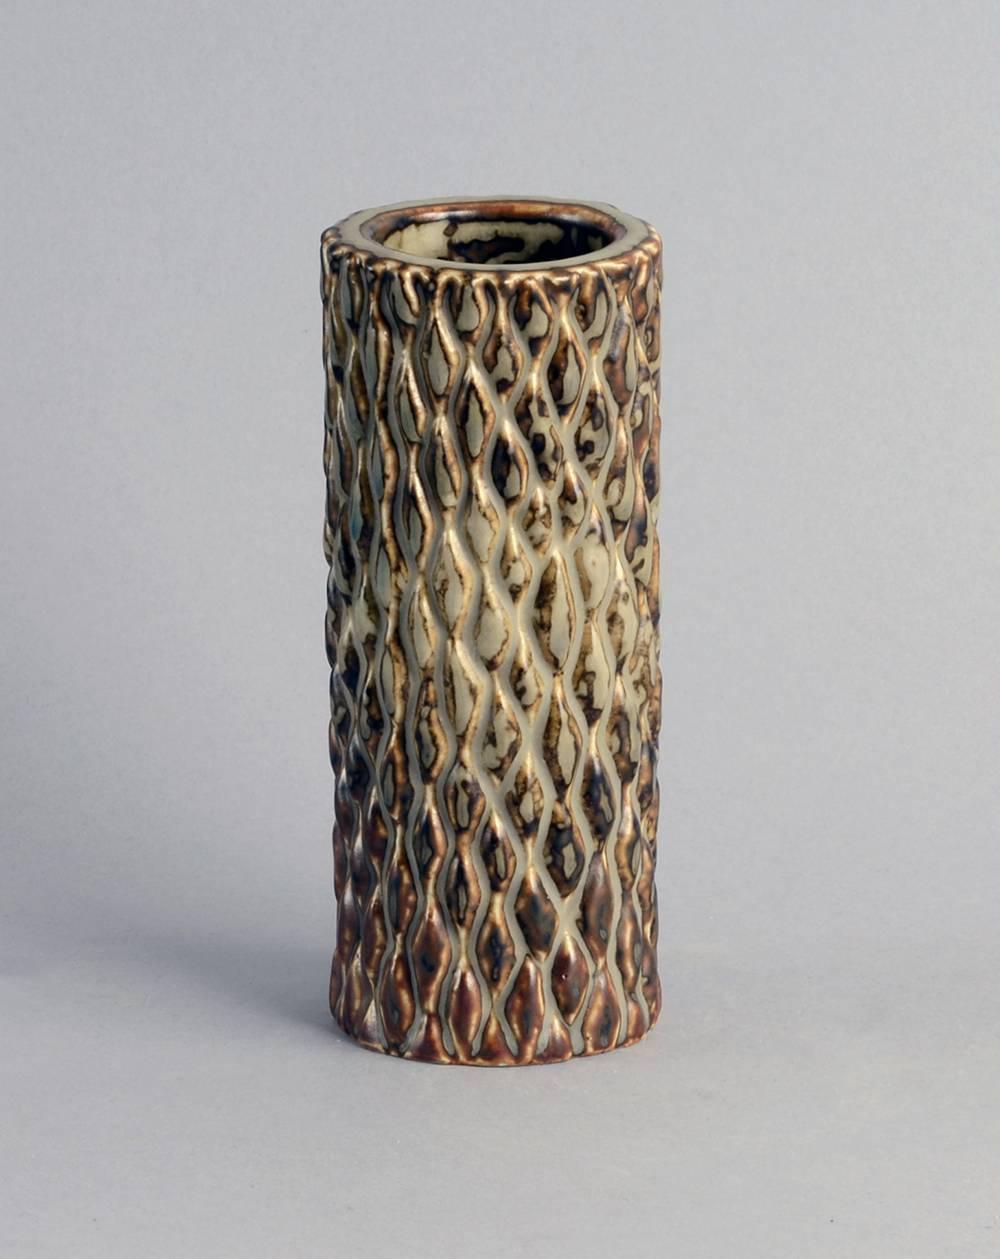 Axel Salto for Royal Copenhagen, Denmark

Stoneware cylindrical budding vase with Sung glaze in brown and cream, 1970s.
Mreasures: height 7